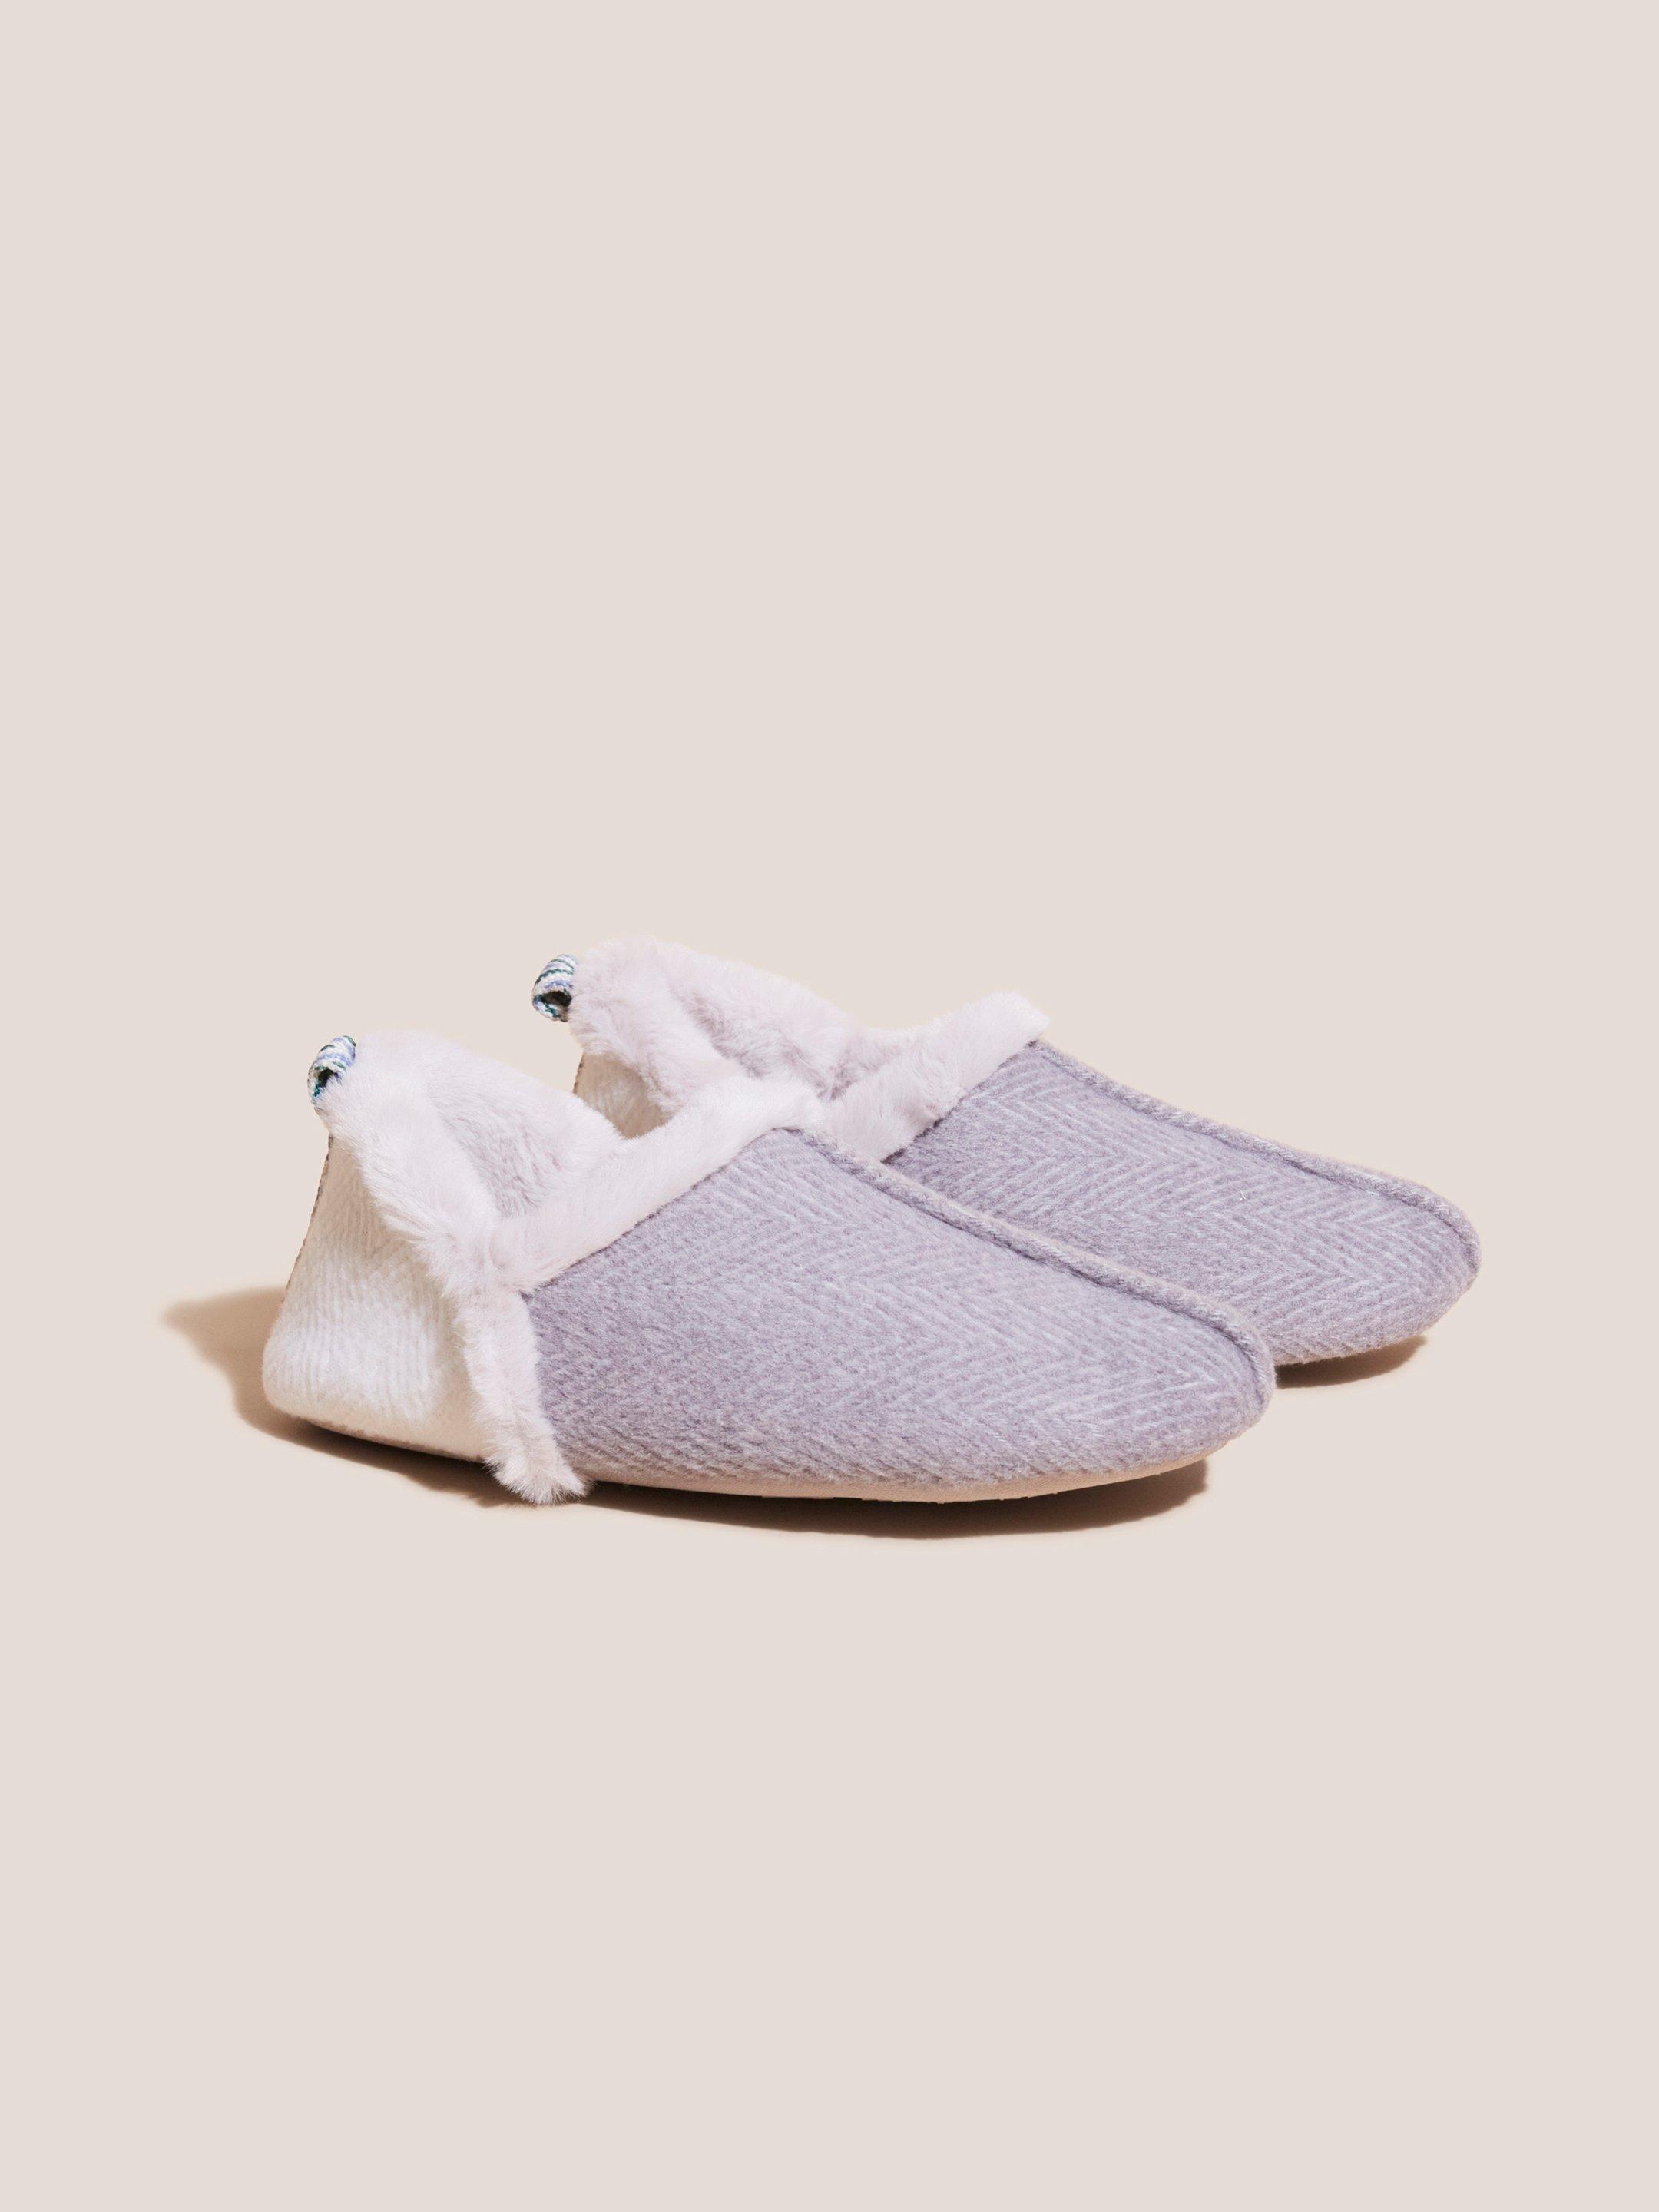 Reya Closed Back Slippers in LGT GREY - FLAT FRONT